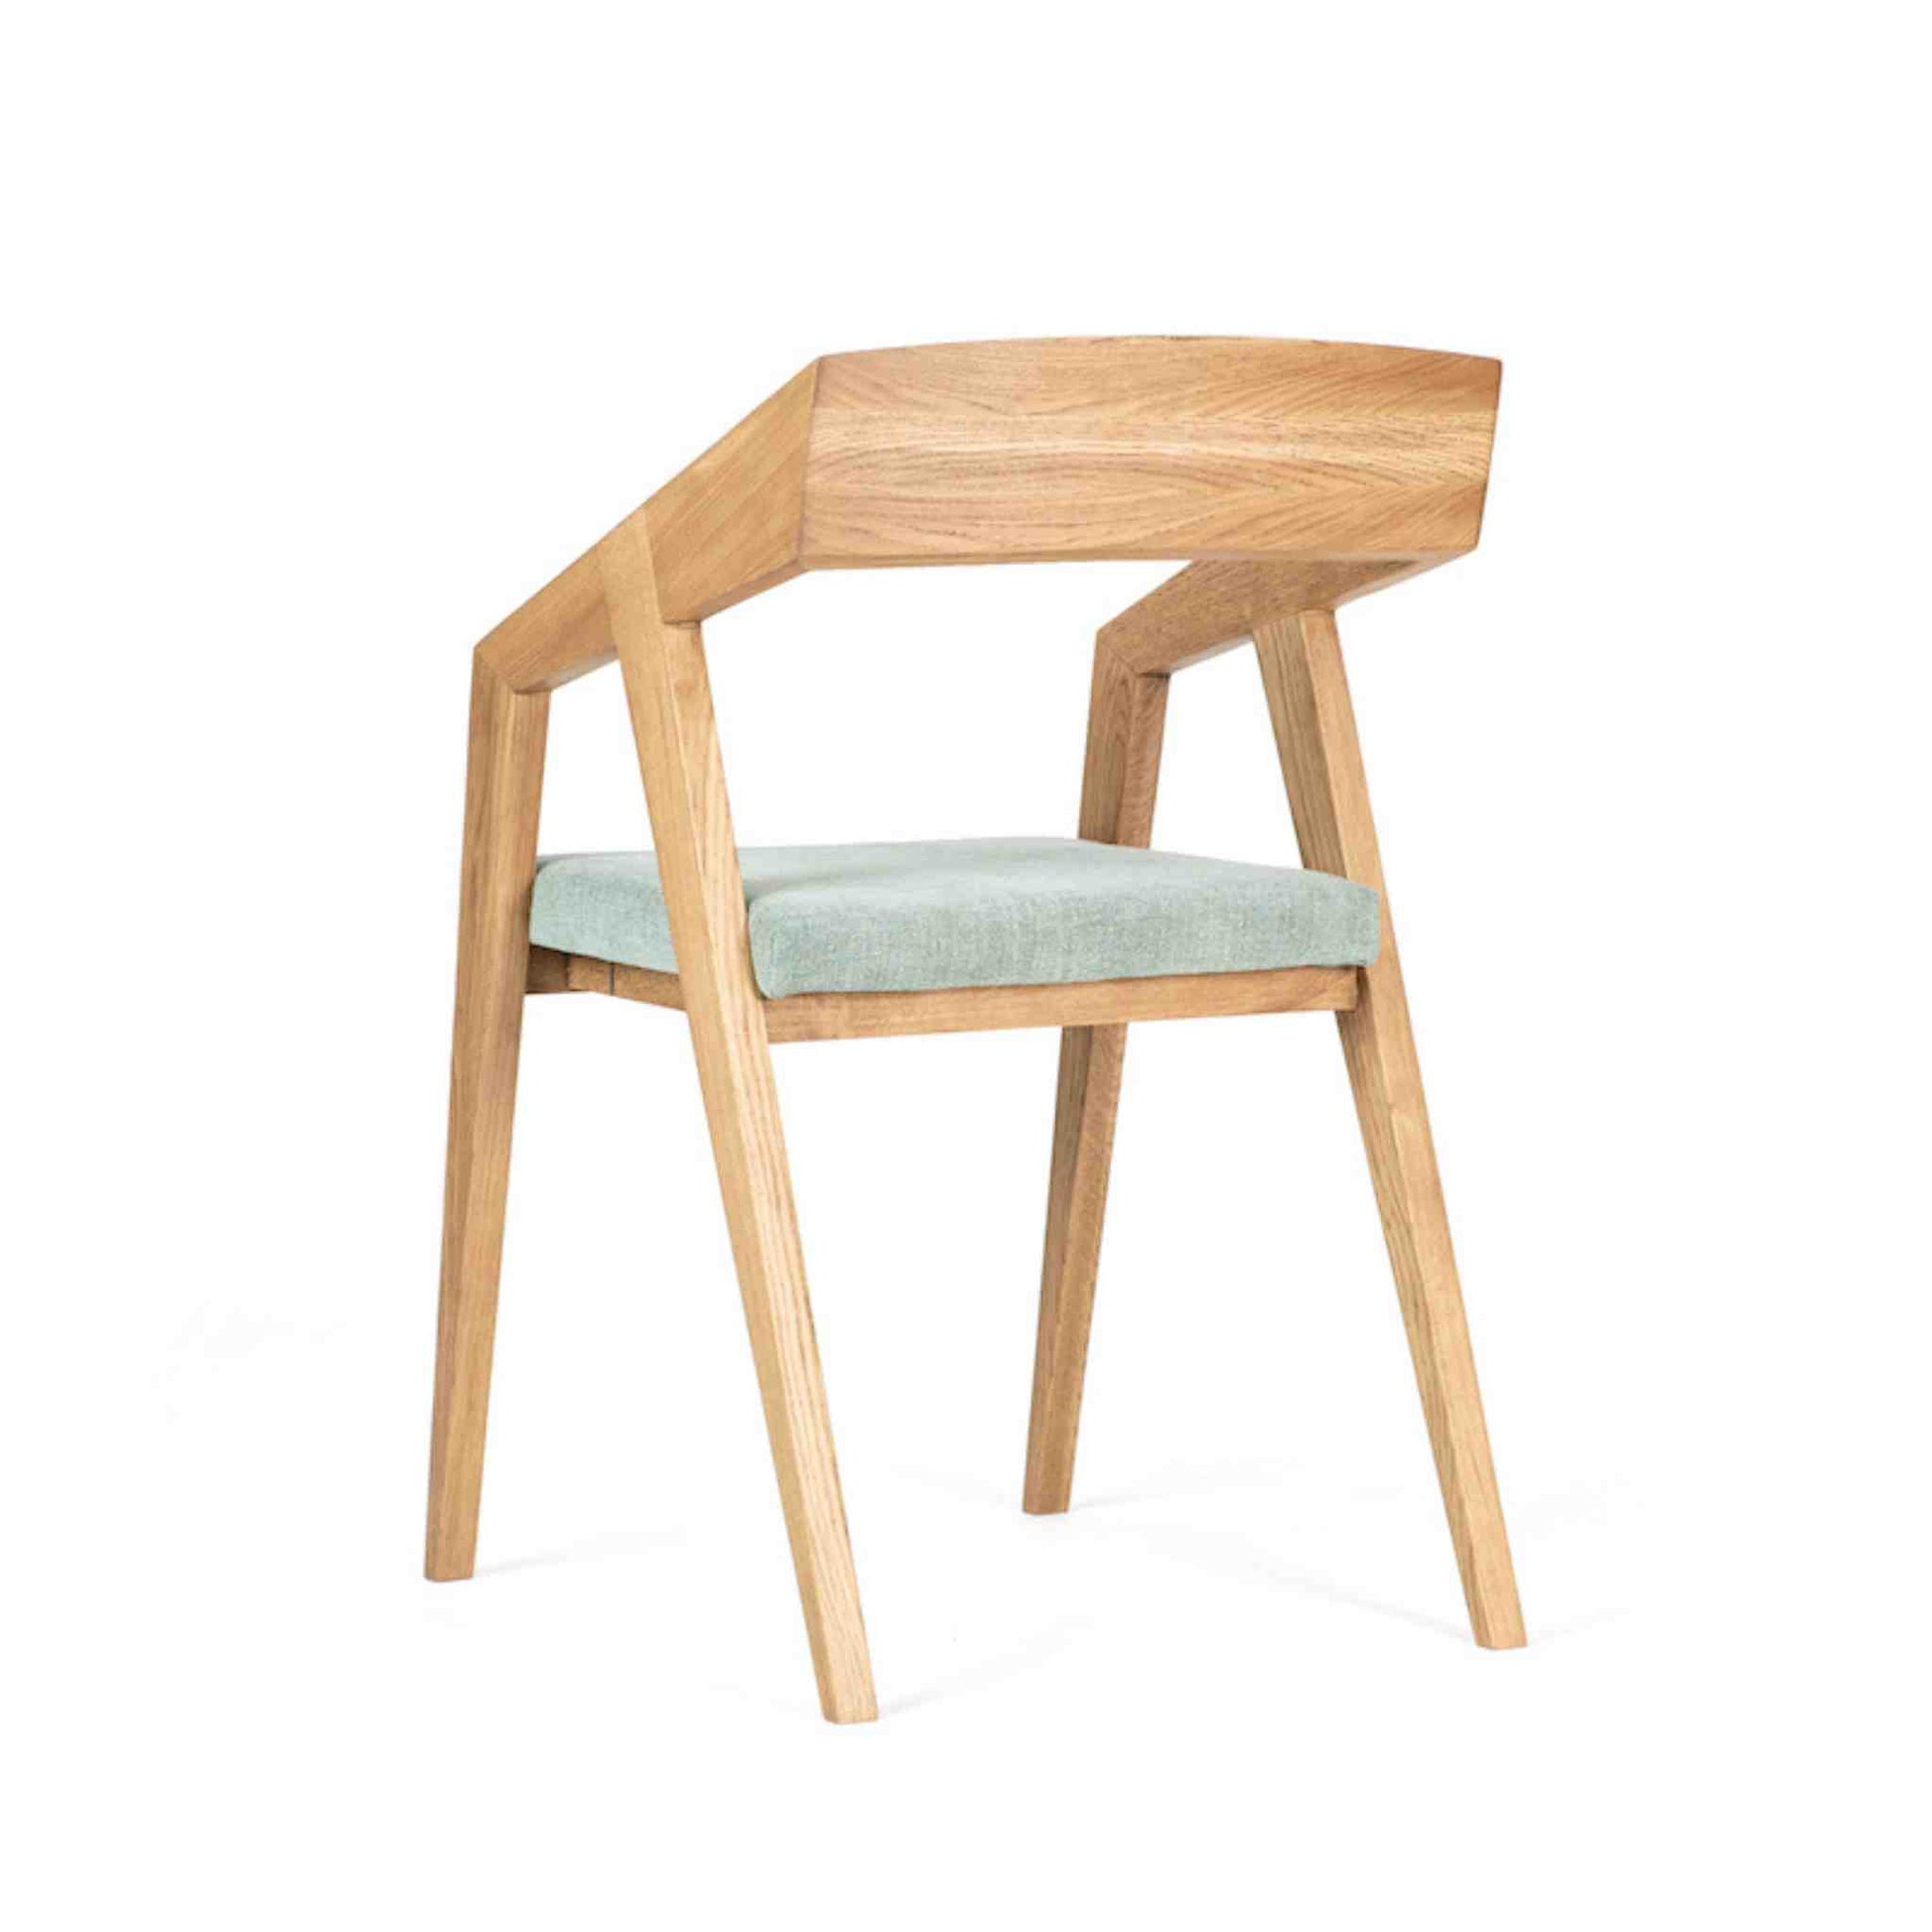 ÉTAUDORÉ Parsenn Solid Oak Wood Chair with Turquoise Upholstery, Back View